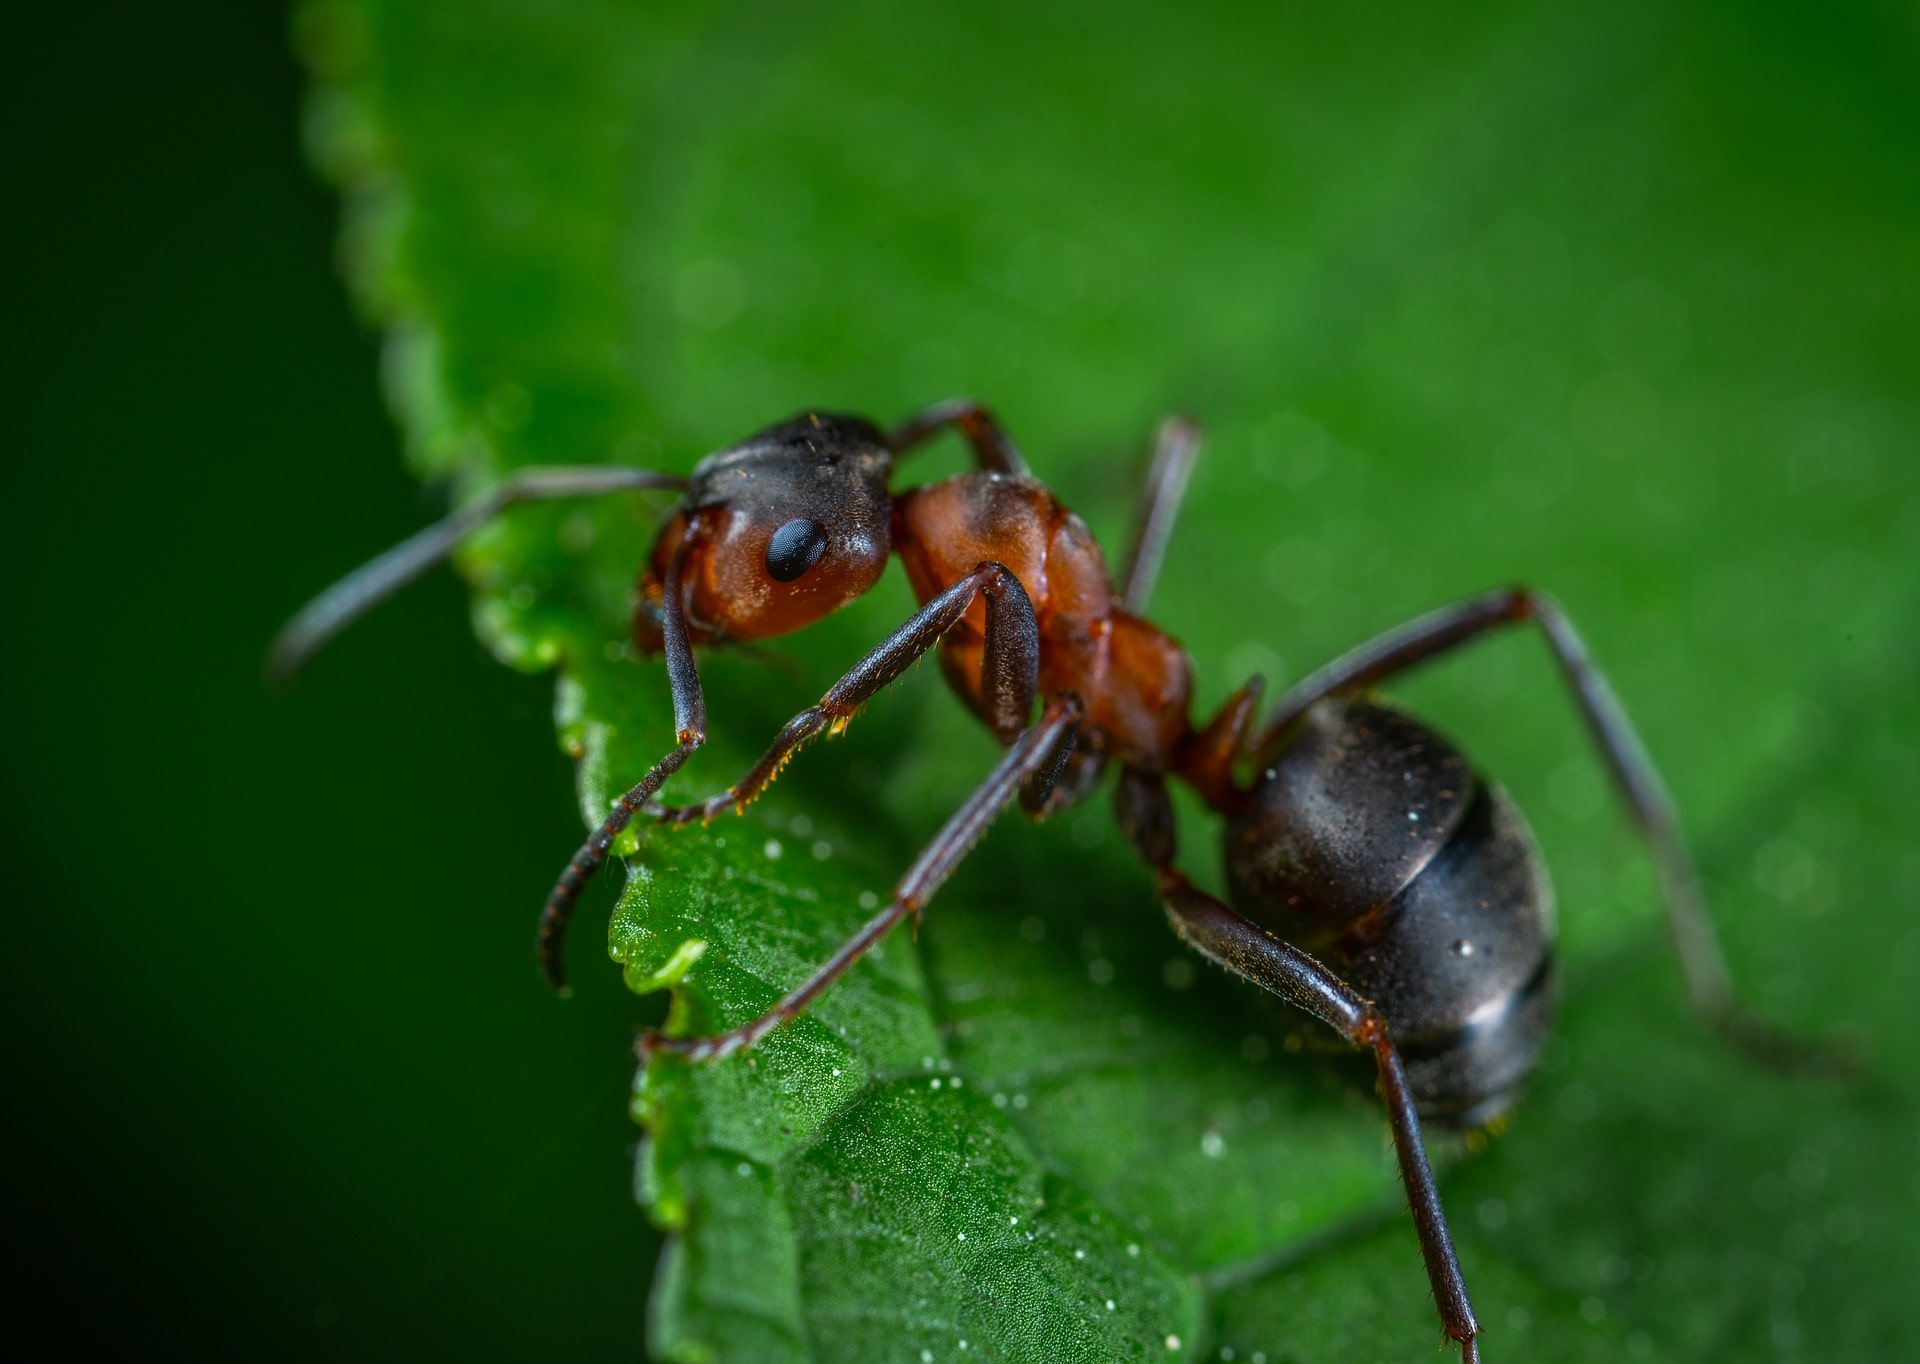 Best Species of Ants for an Ant Farm